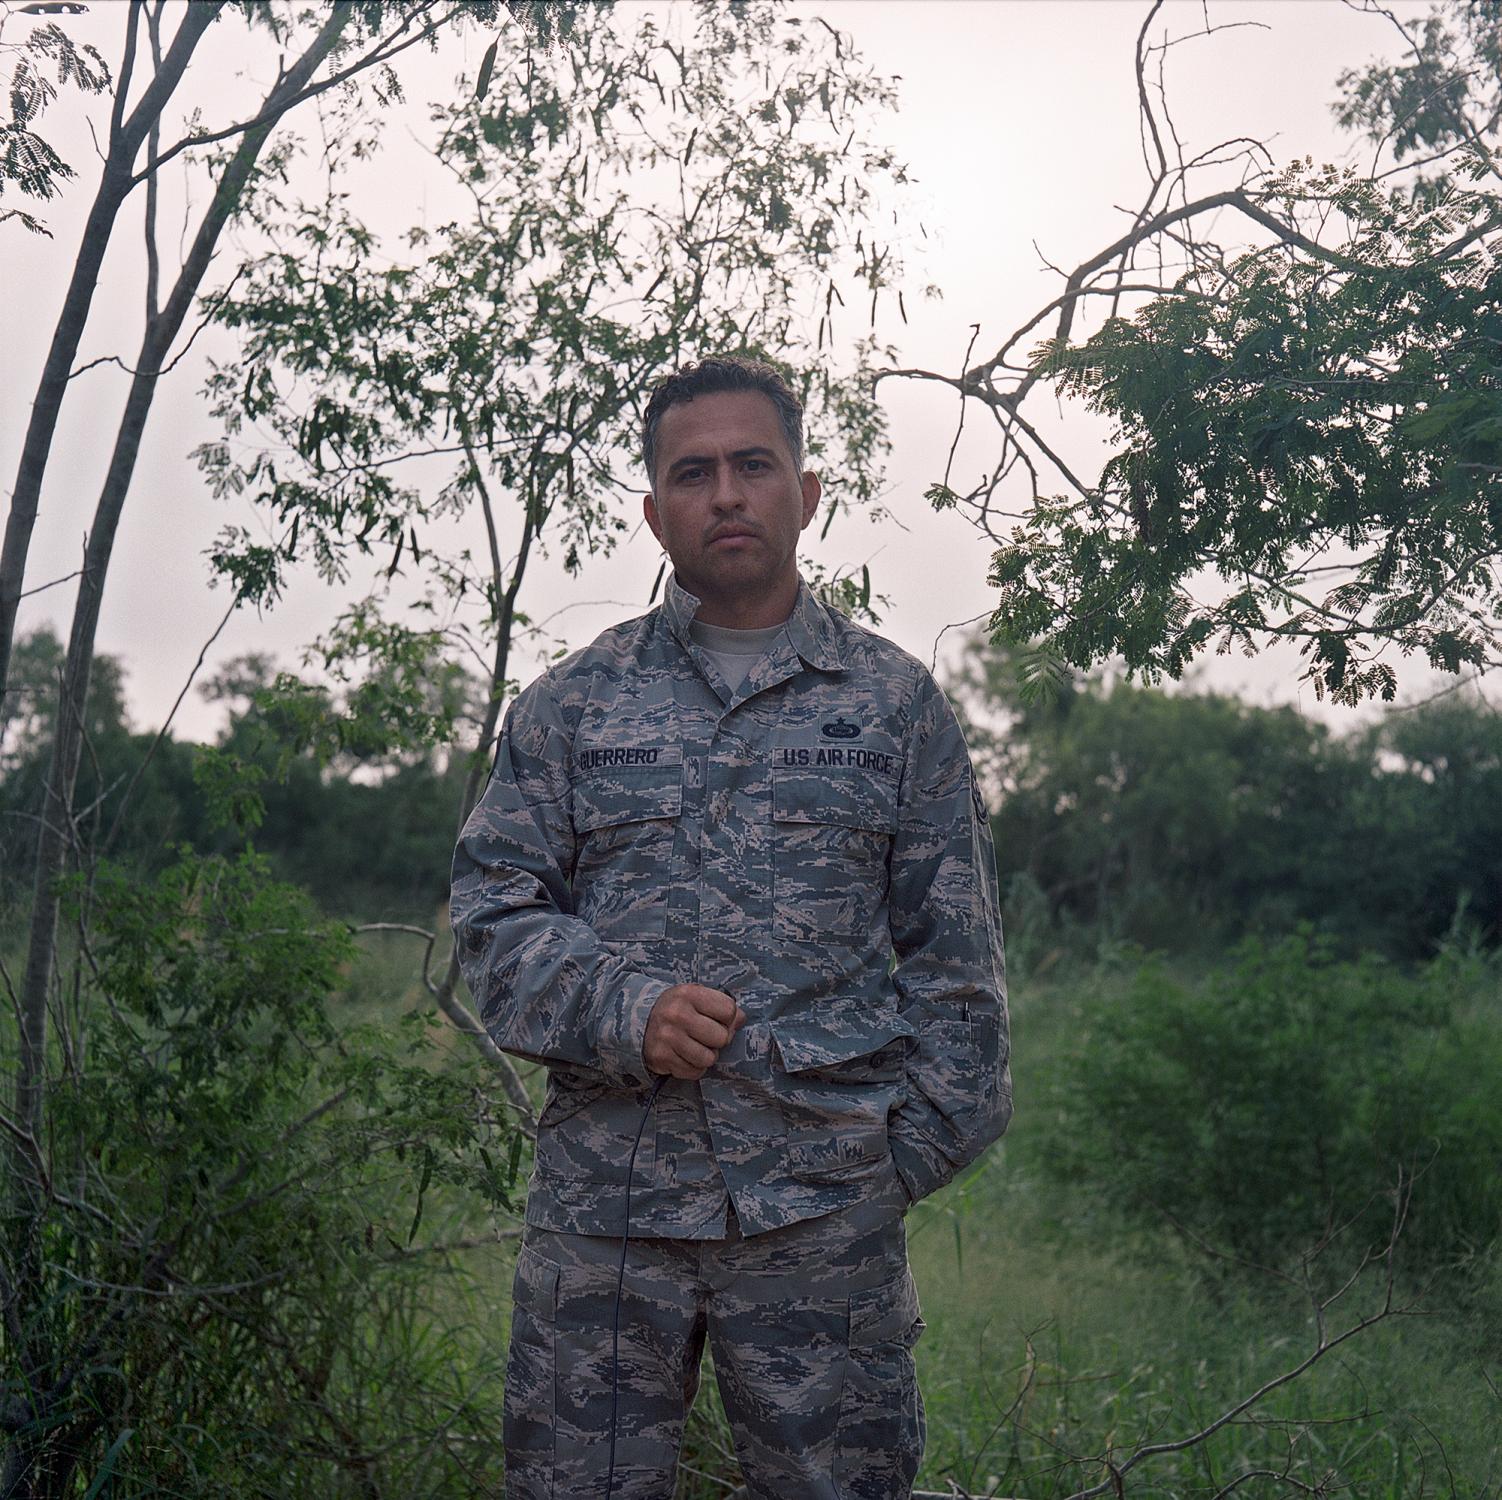  Brownsville, TX - OCTOBER 17, 2020: Self-portrait at the U.S.-Mexico border. Credit: Andr&eacute;s Guerrero 